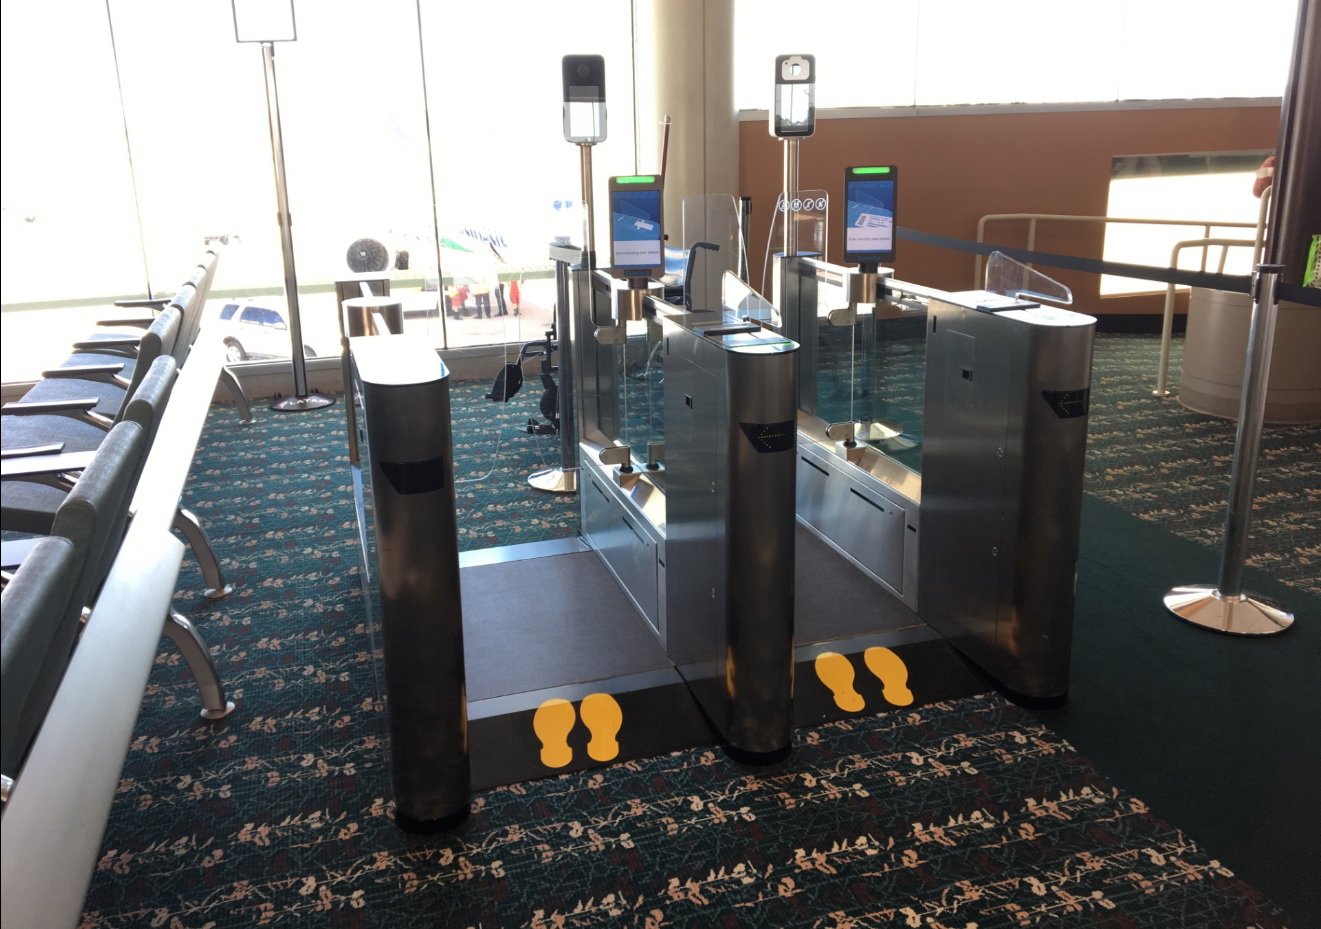 Passengers flying with British Airways from Orlando International Airport (MCO) to London Gatwick are using biometric boarding at the gate. Click to enlarge.